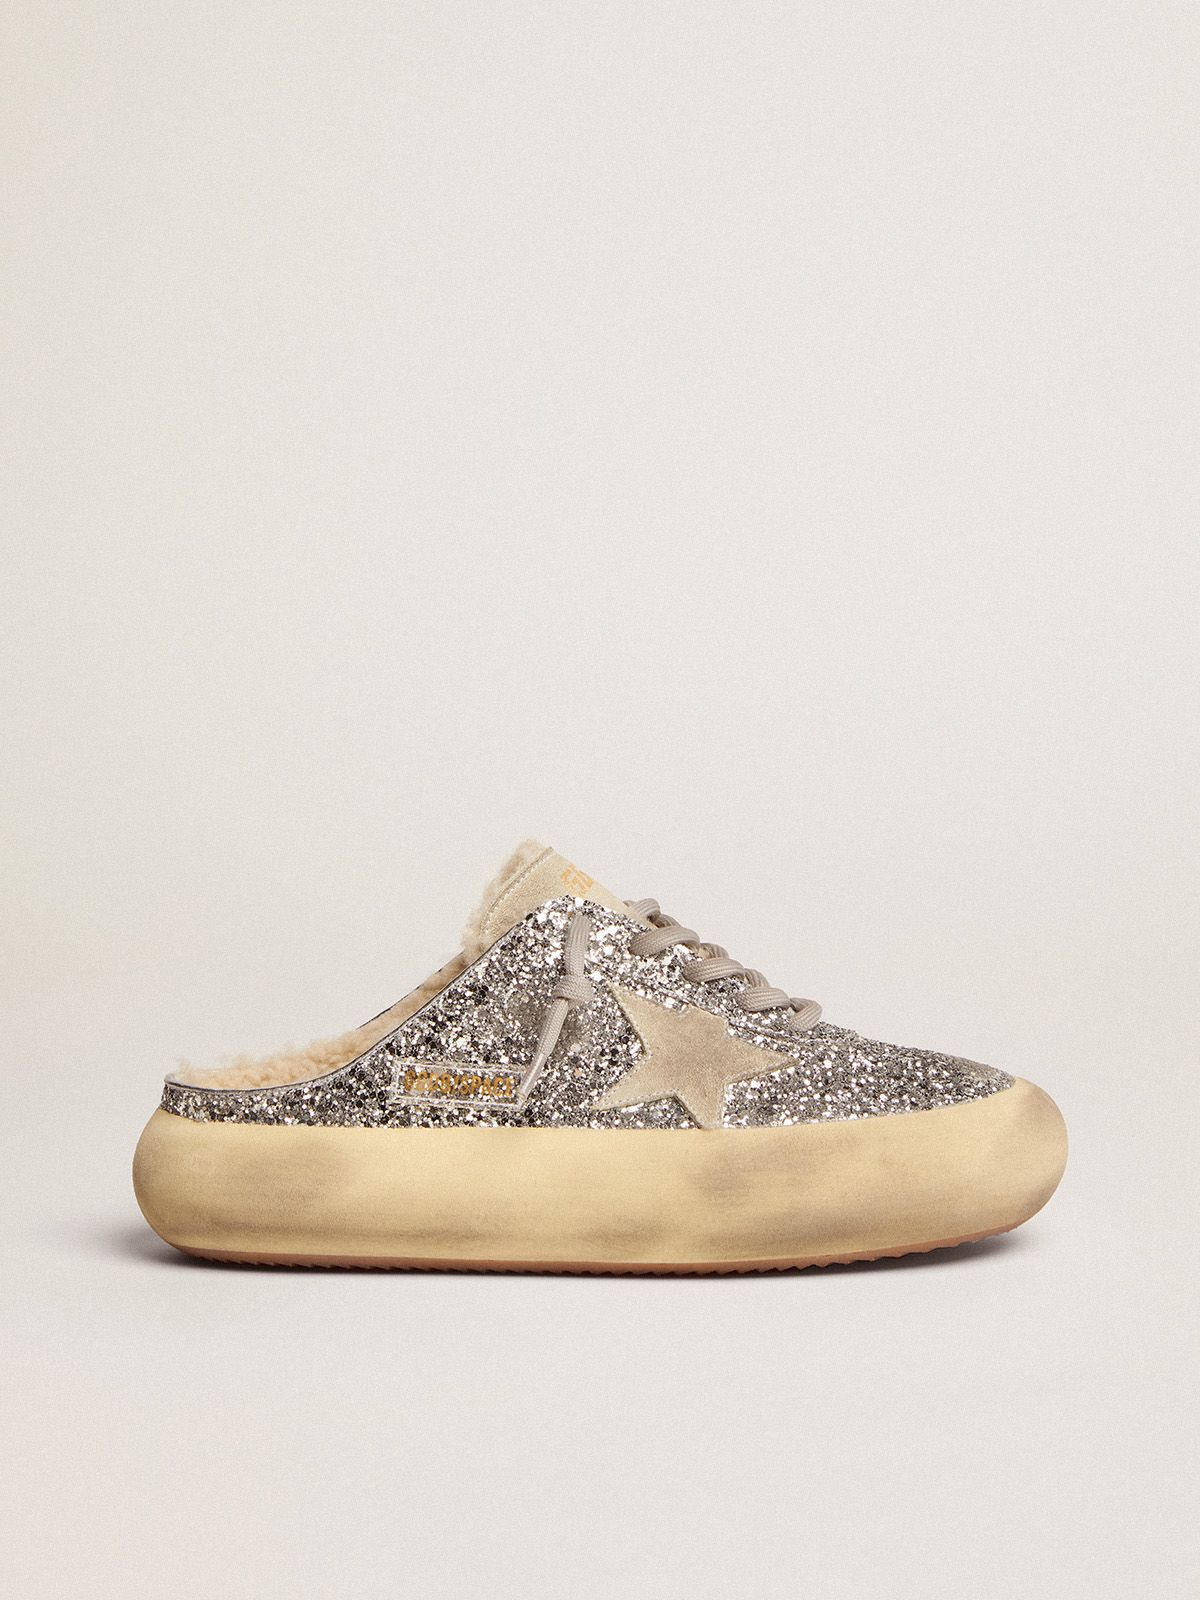 golden goose with shearling Space-Star shoes glitter silver in lining Sabot